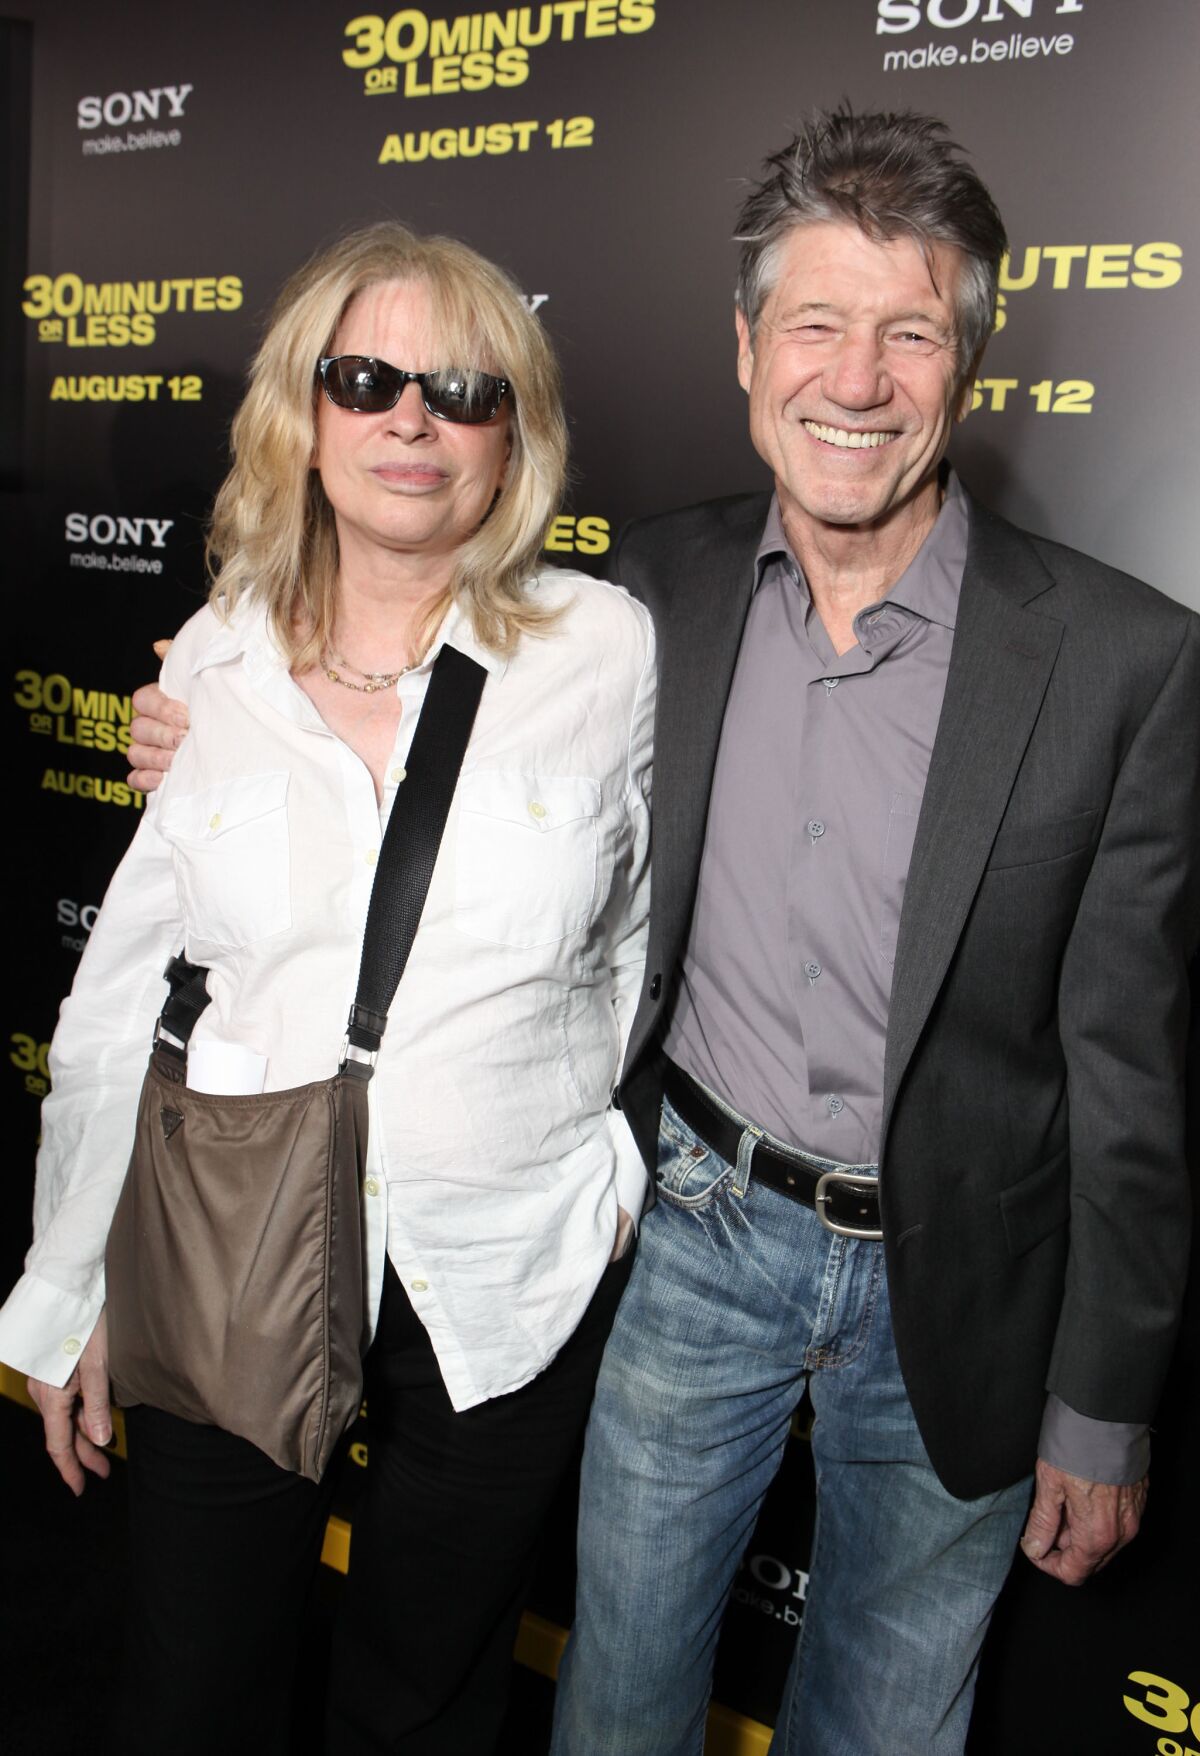 A woman in sunglasses stands with a smiling man at a movie premiere